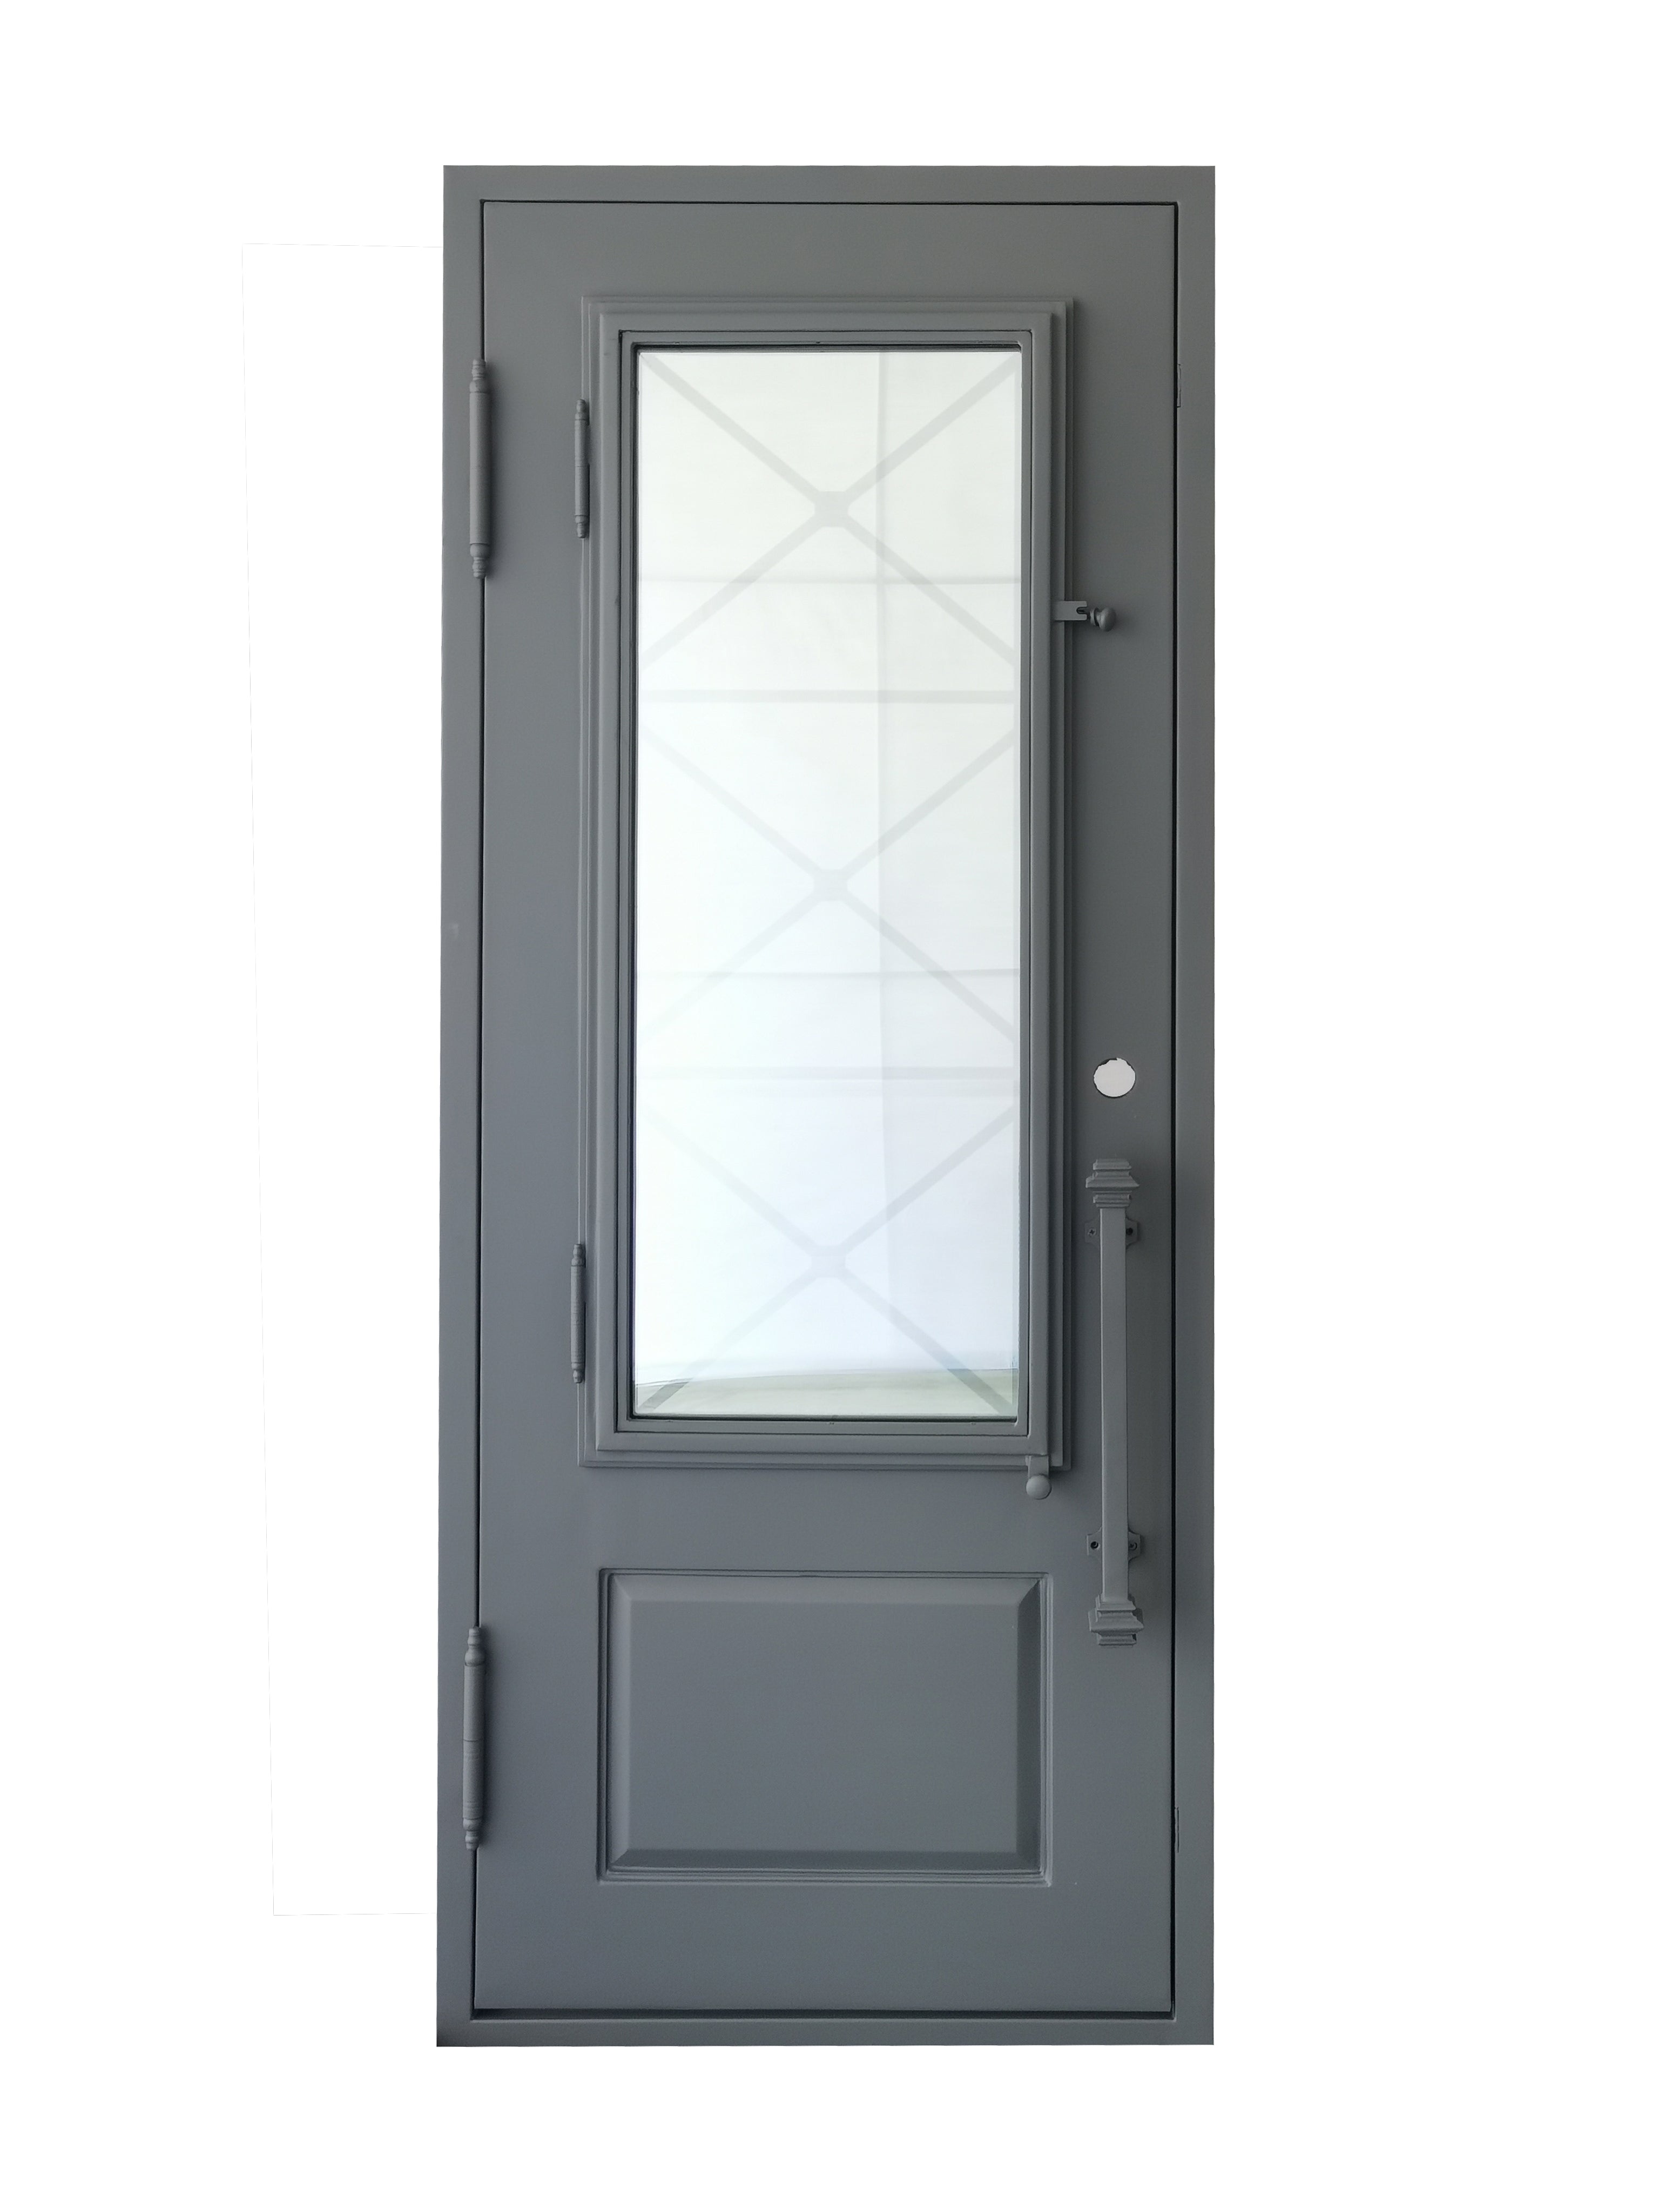 Rockport Model Pre Hung Single Front Entry Wrought Iron Door With Reflective Glass Dark Grey Finish